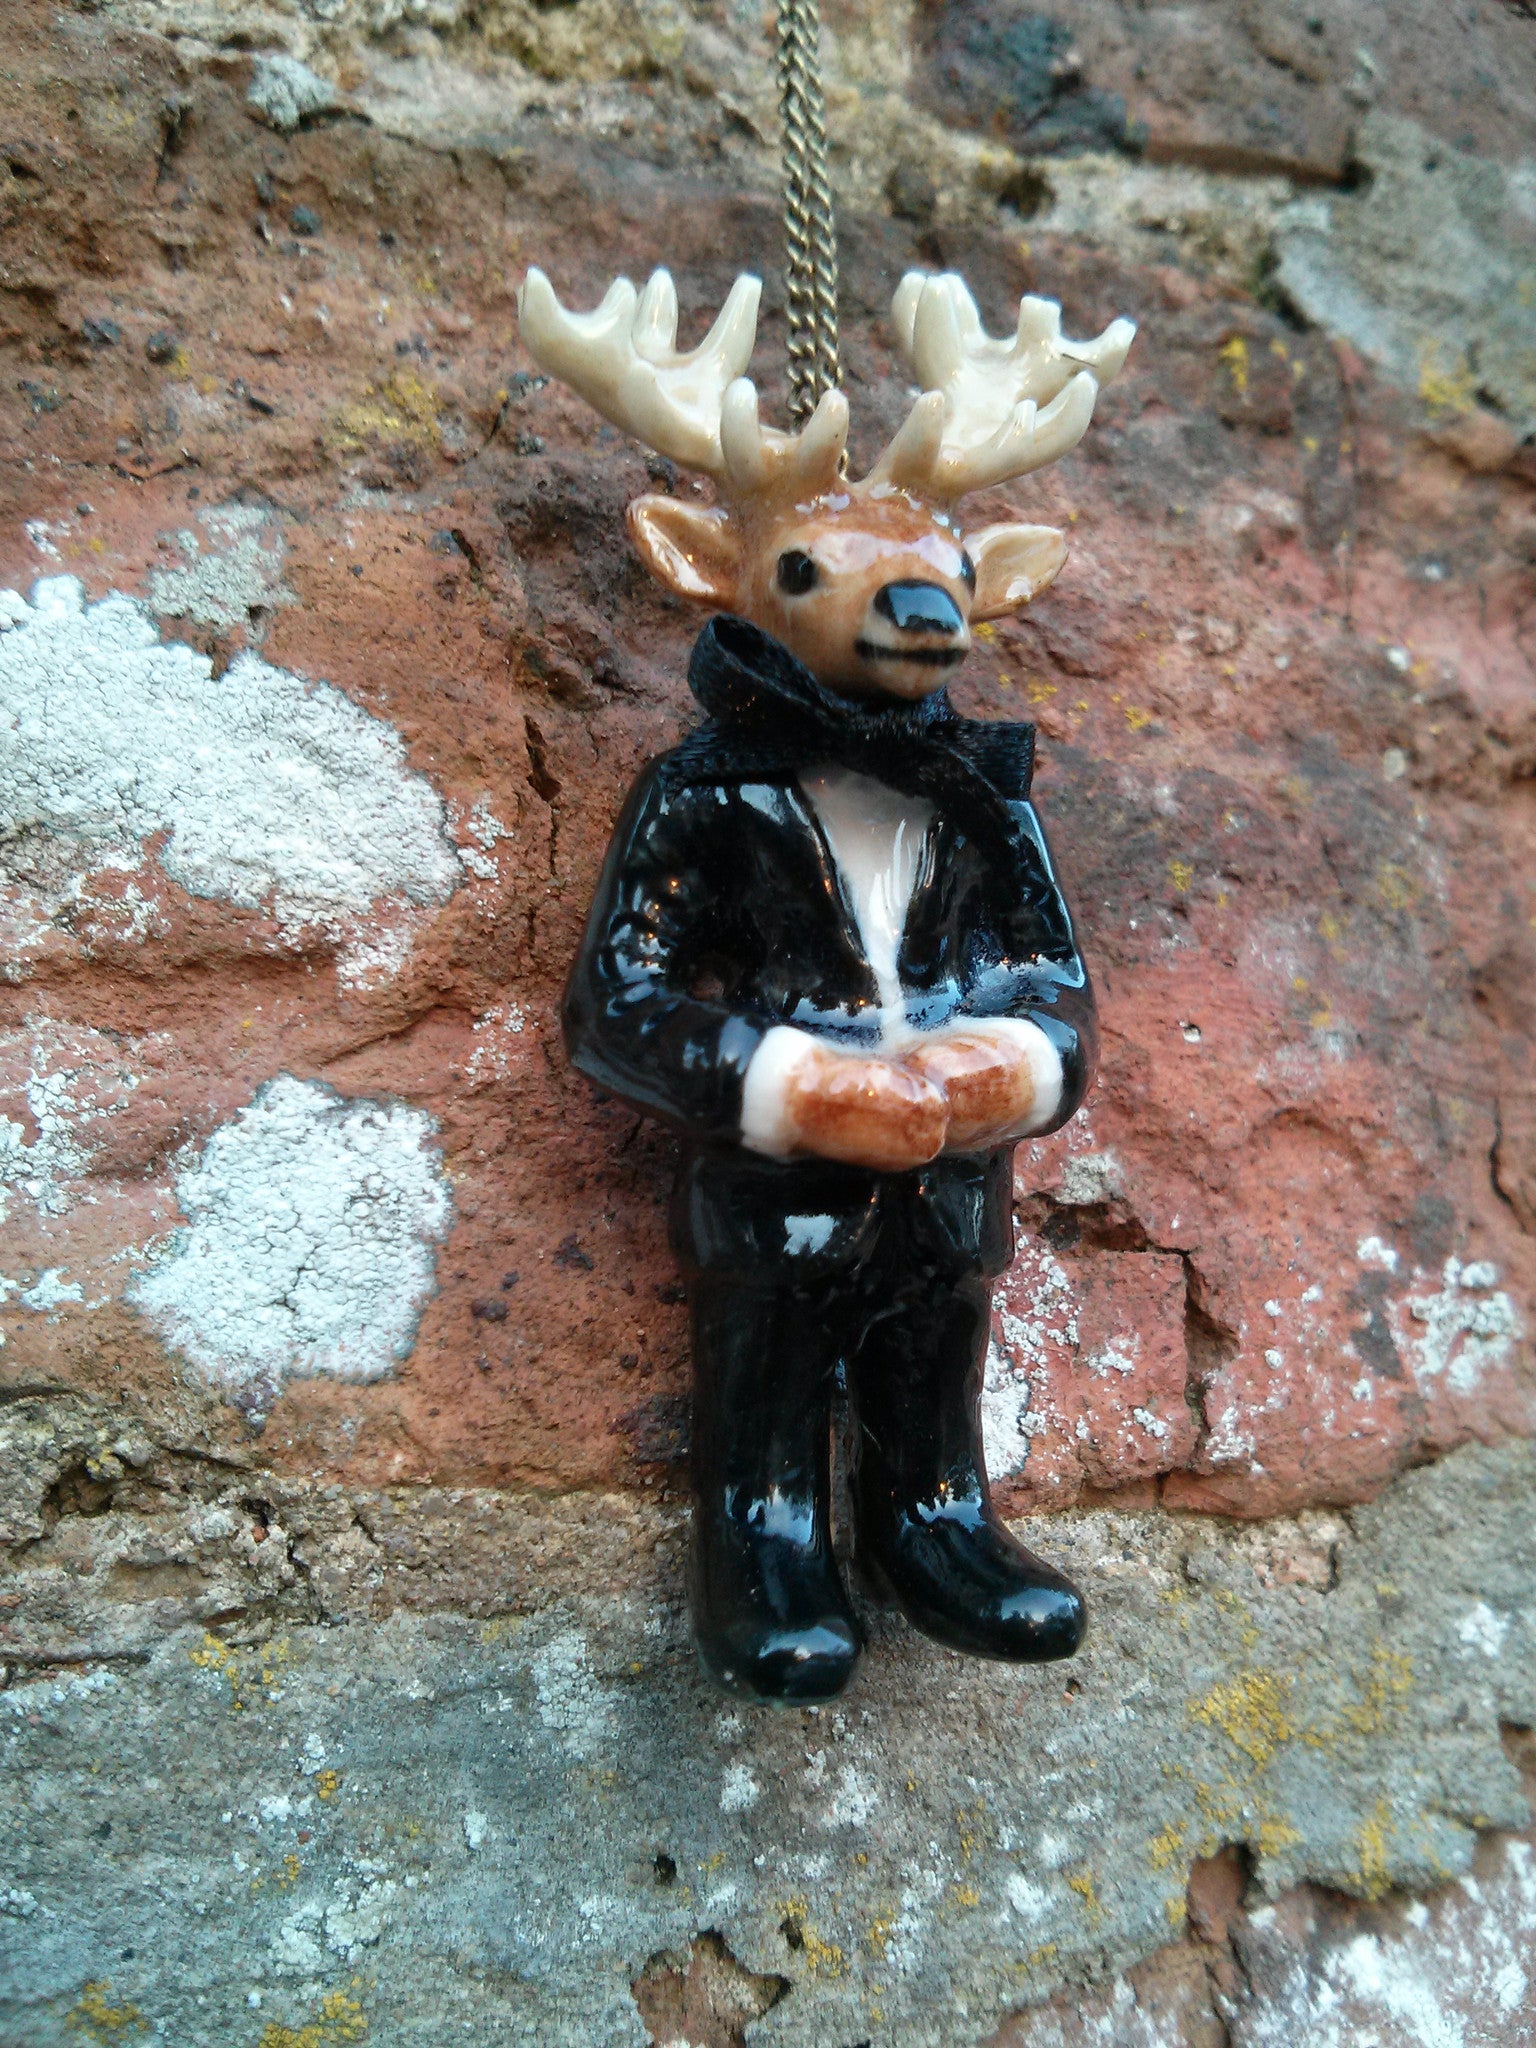 Mr Stag Necklace